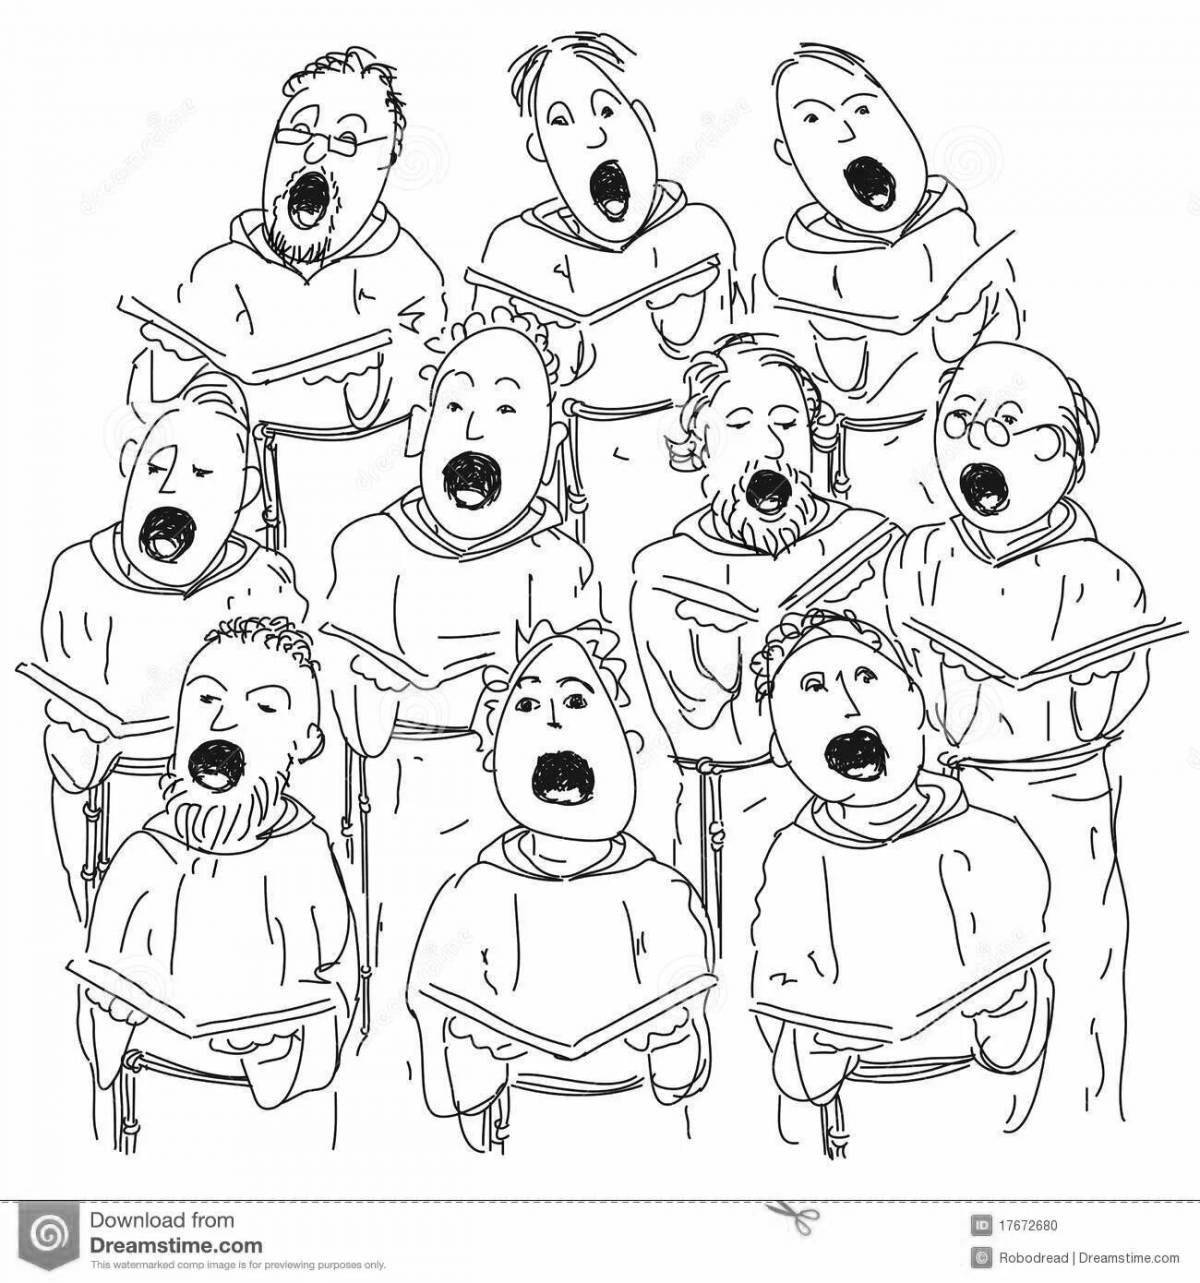 Blissful choir coloring pages